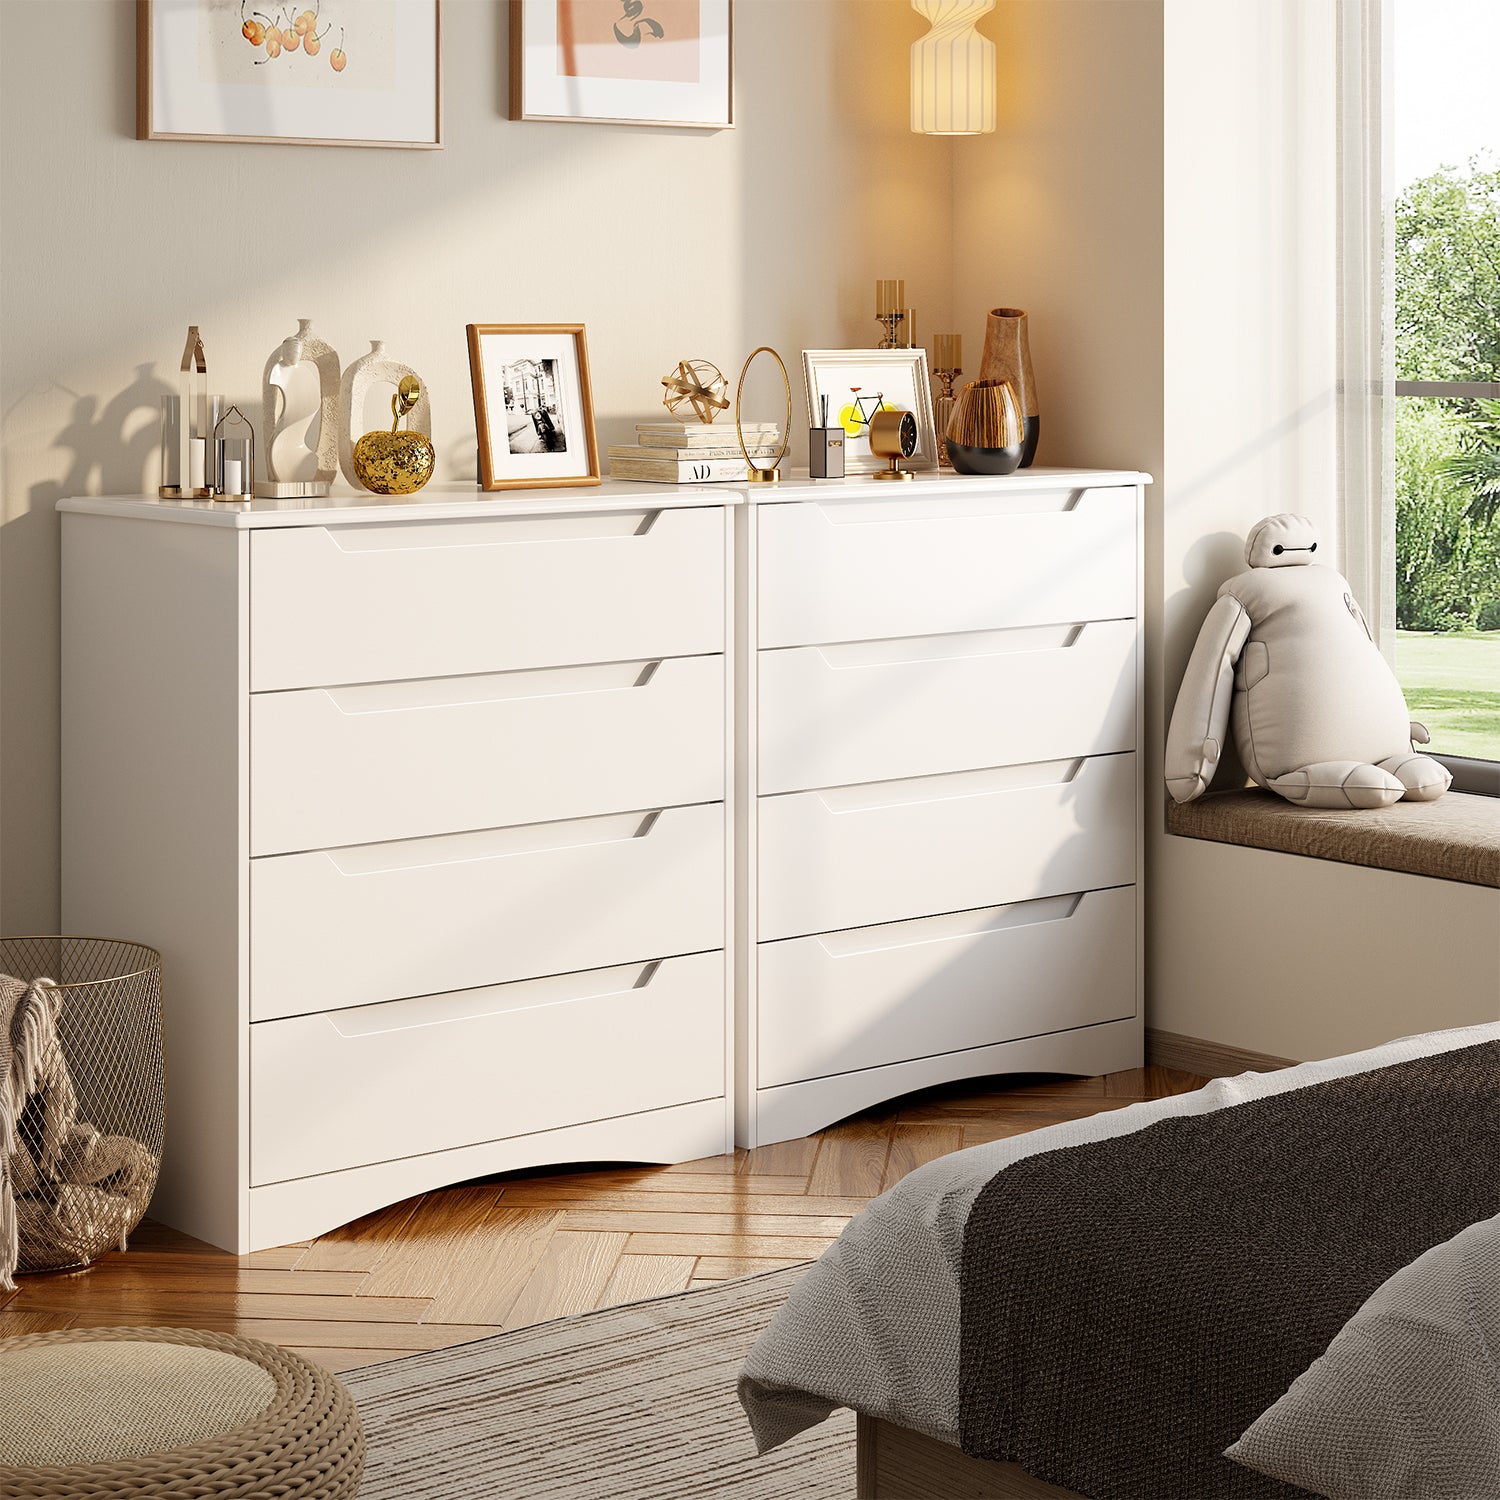 Gizoon AP22 4 Drawer Dresser with Storage, Wood Chest of Drawers with Modern Dresser